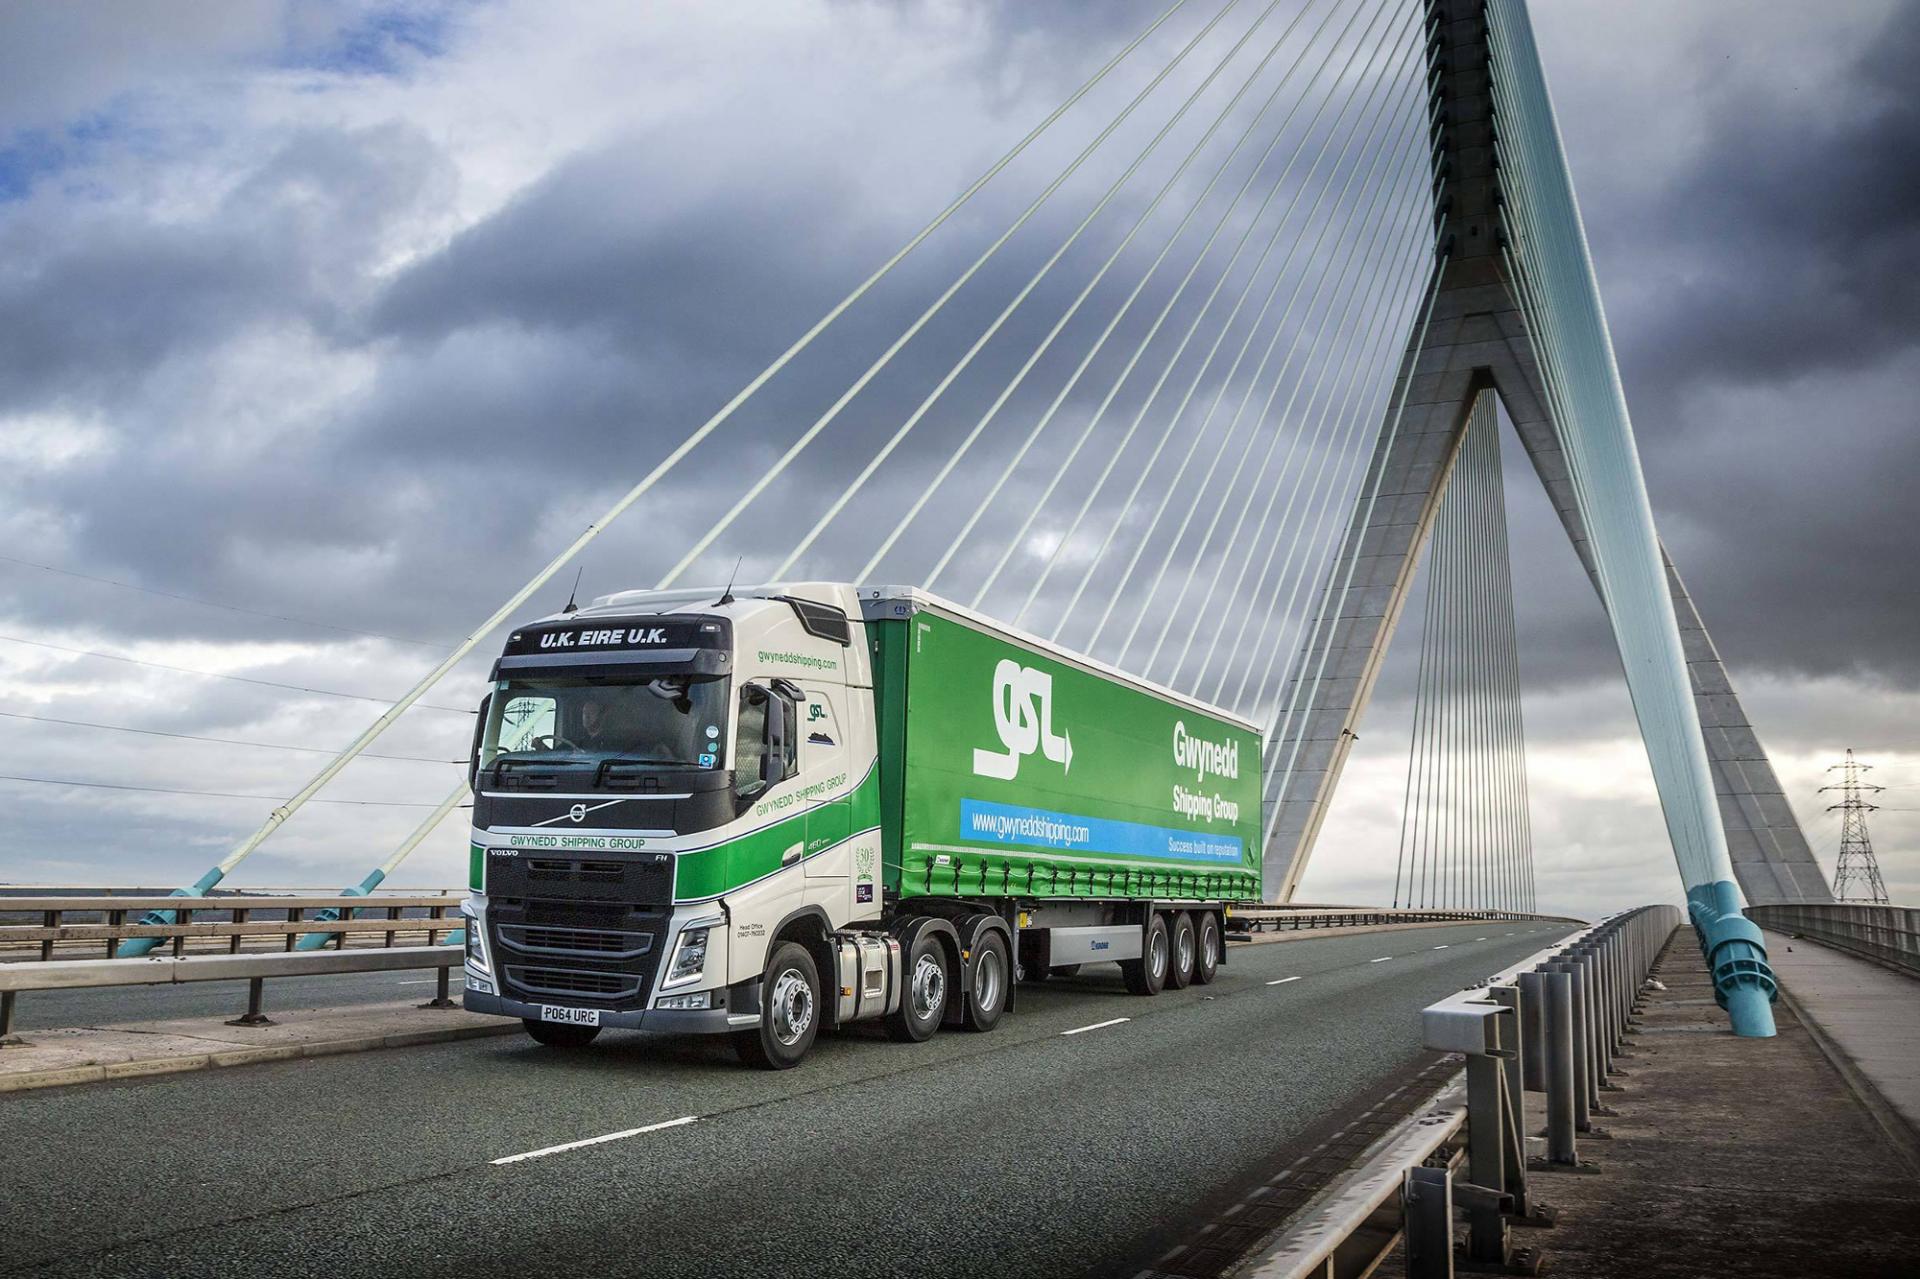 Anglesey haulage firm falls into administration